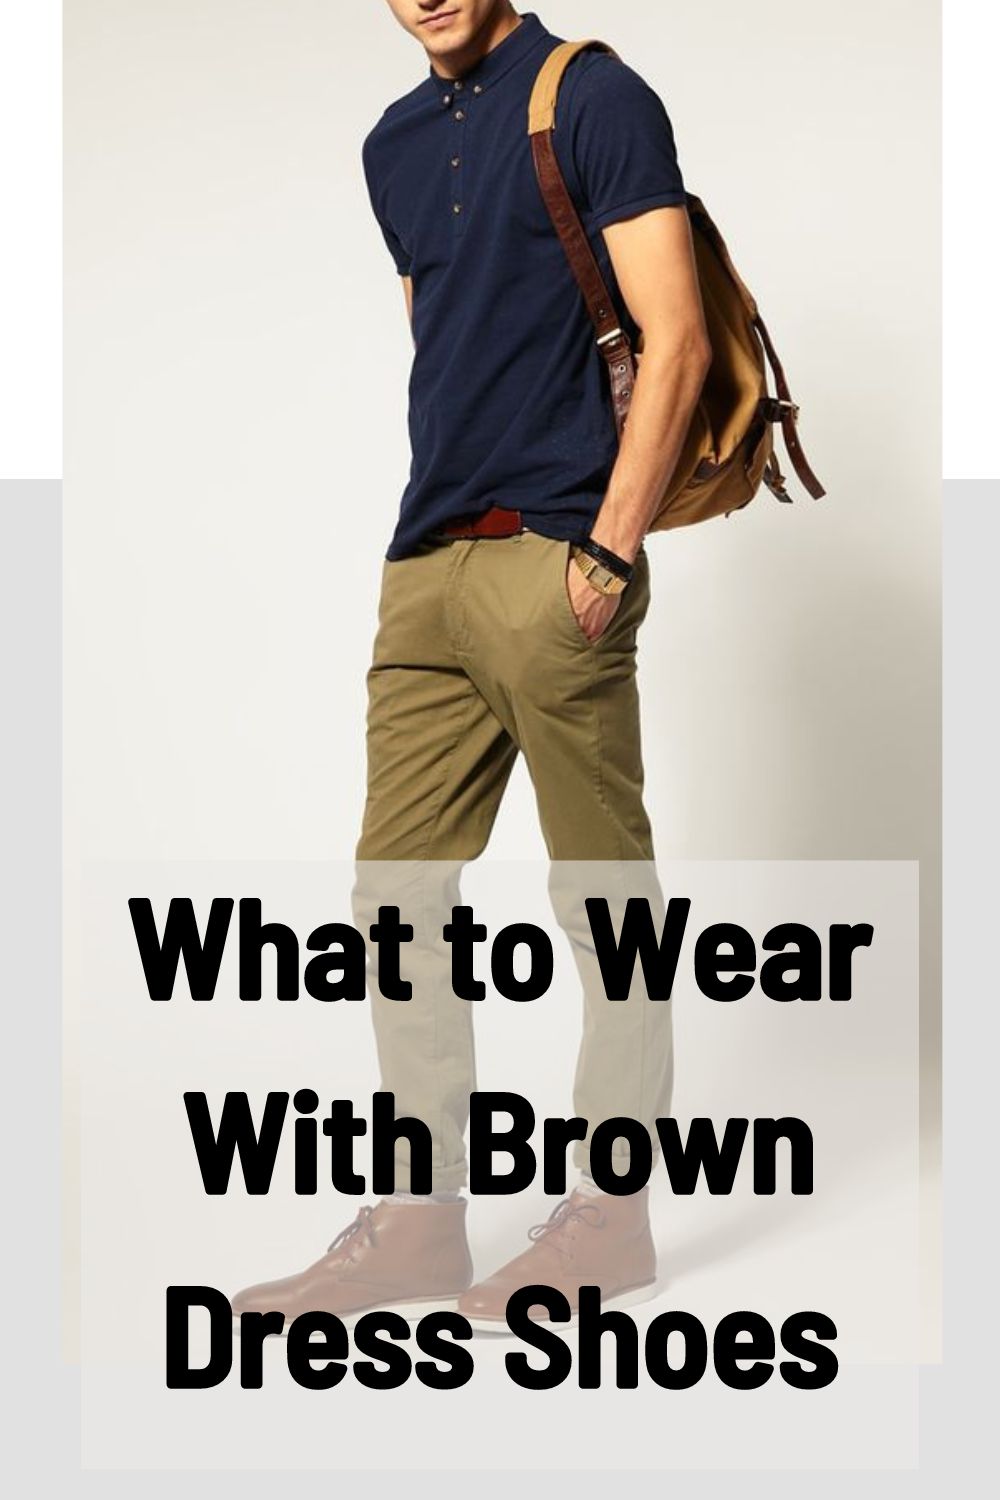 What to Wear With Brown Dress Shoes